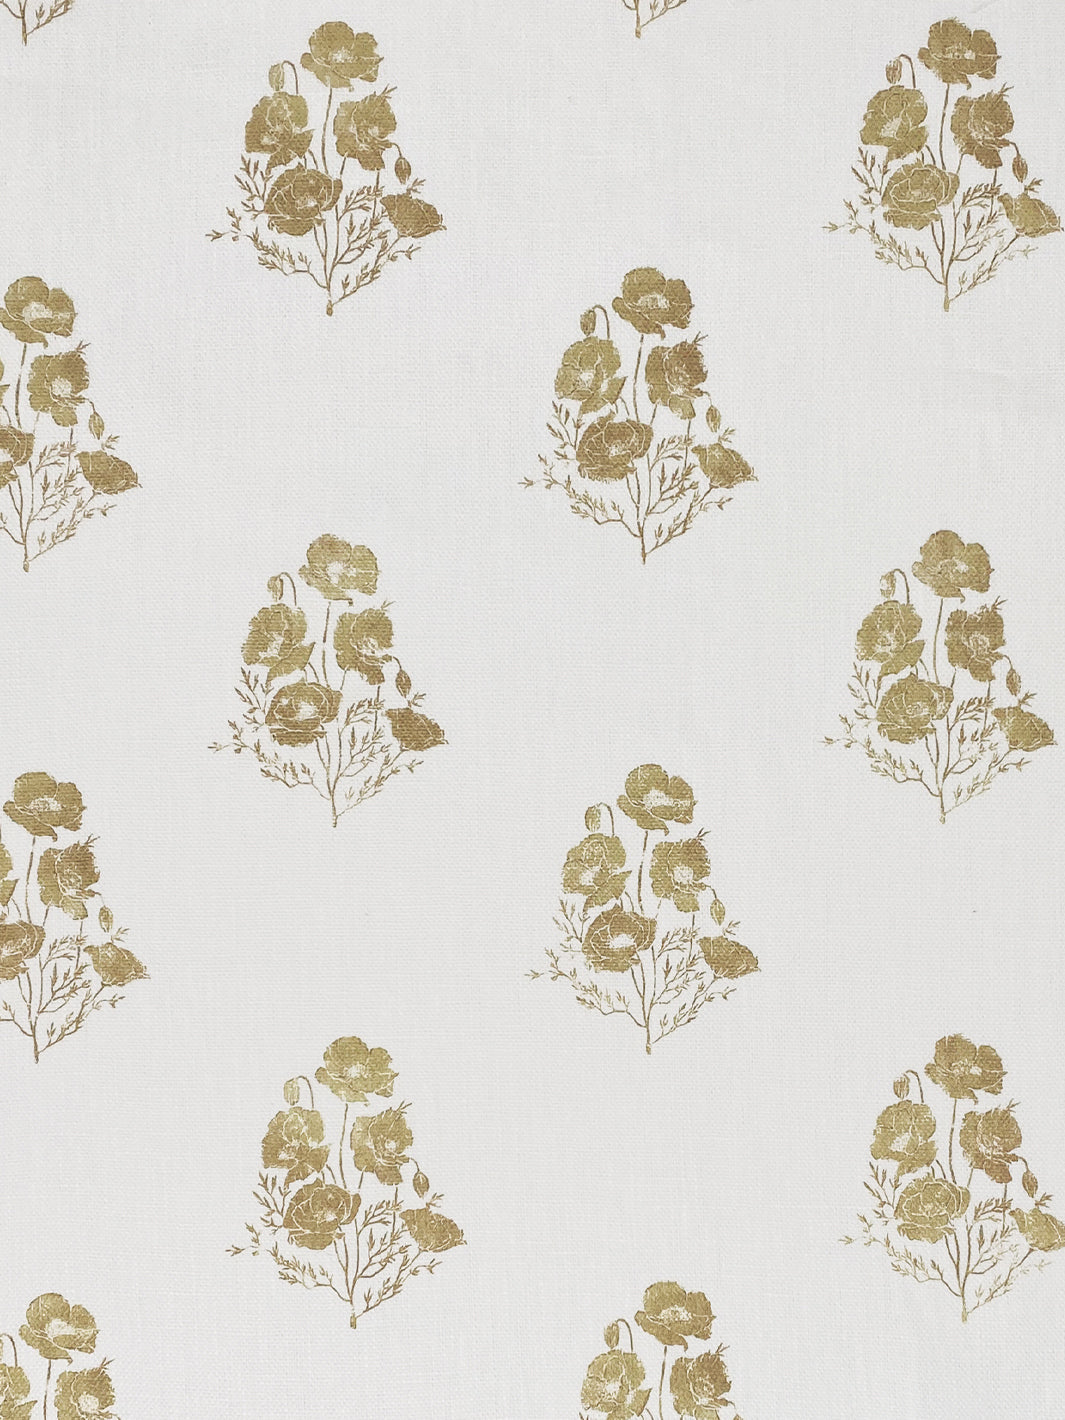 'California Poppy' Linen Fabric by Nathan Turner - Gold